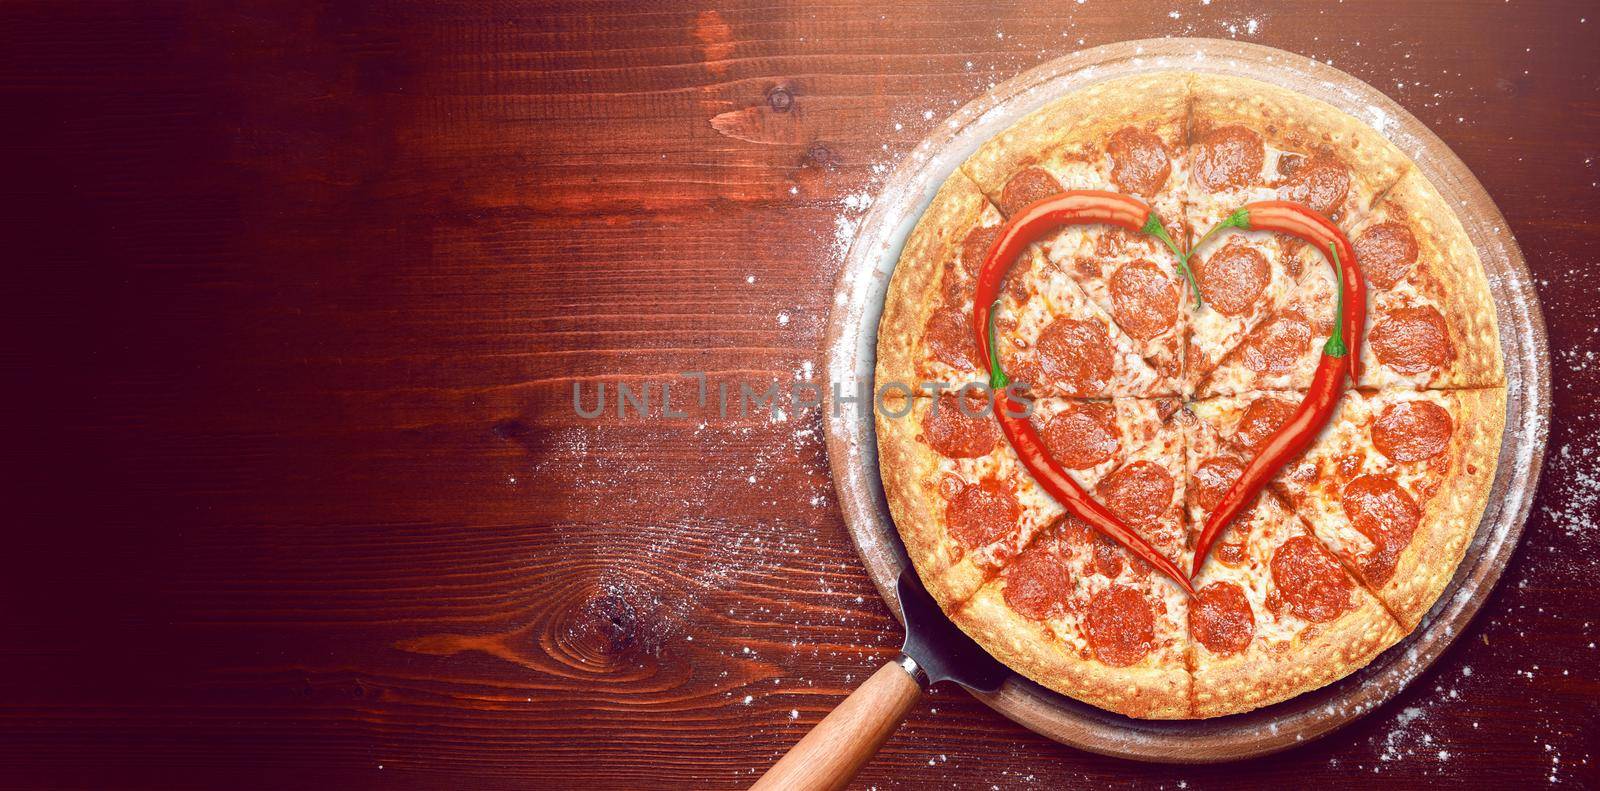 fresh american pizza on wooden table with space for text by vvmich